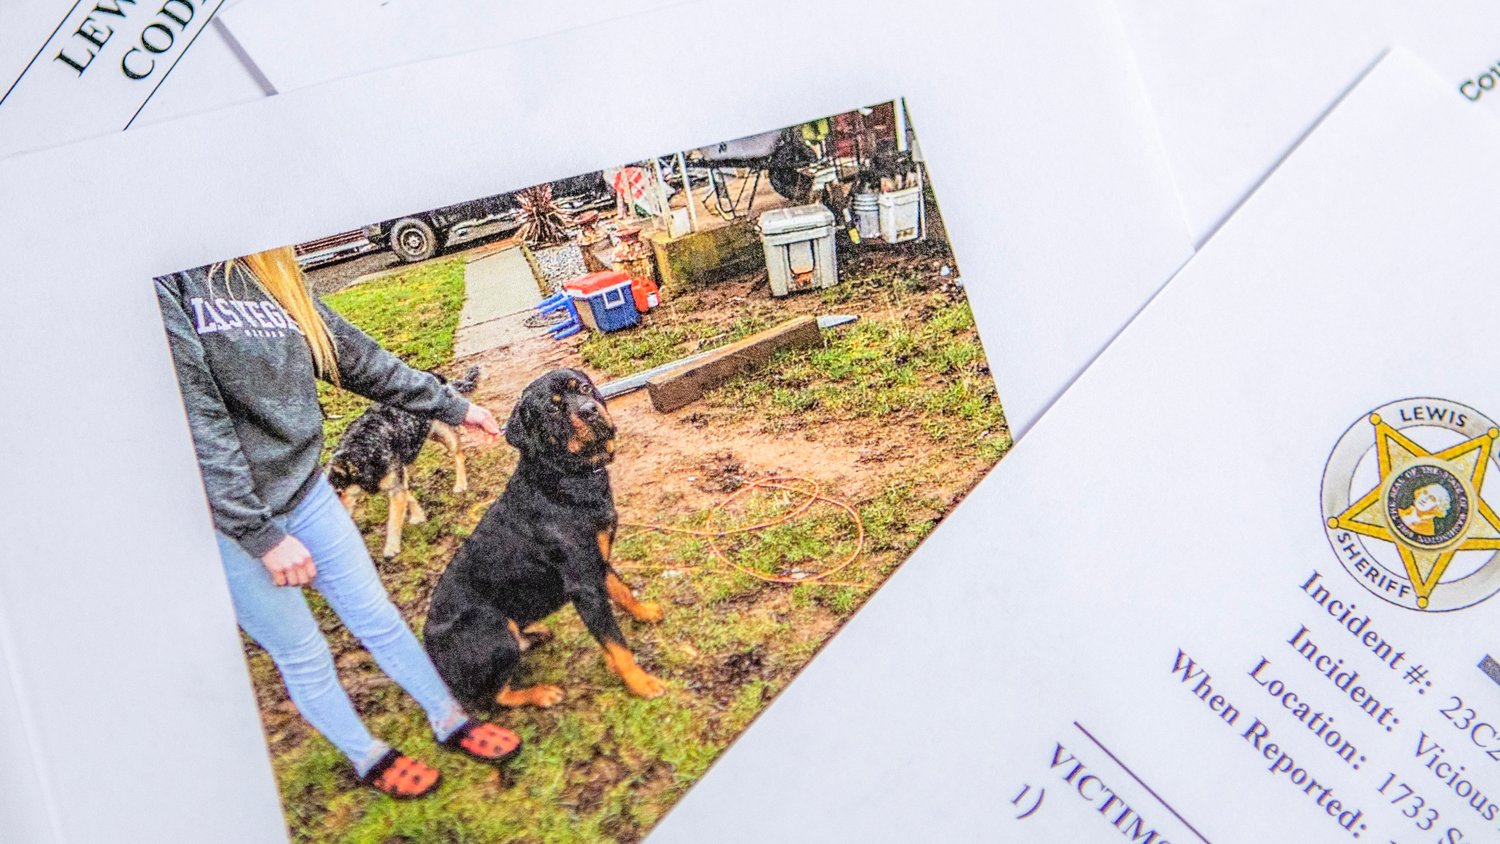 Johnny Cash, a rottweiler who lives in Onalaska, is pictured in the Lewis County Sheriff’s Office report of a vicious dog attack on Jan. 8 in files used by the Lewis County Dangerous Animal Designation board, which rules him not dangerous due to lack of evidence that he bit someone.